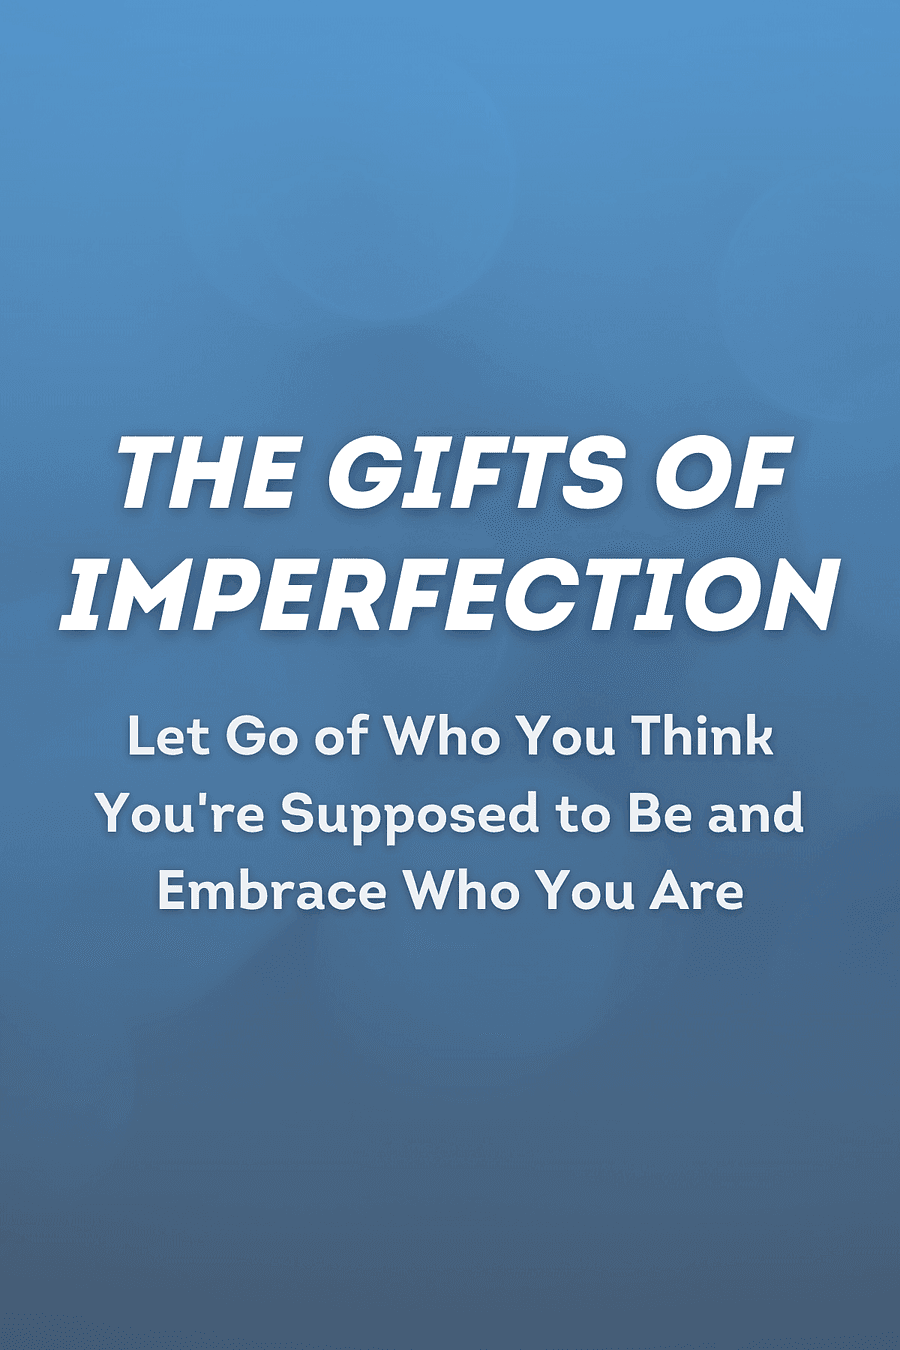 The Gifts of Imperfection by Brené Brown - Book Summary